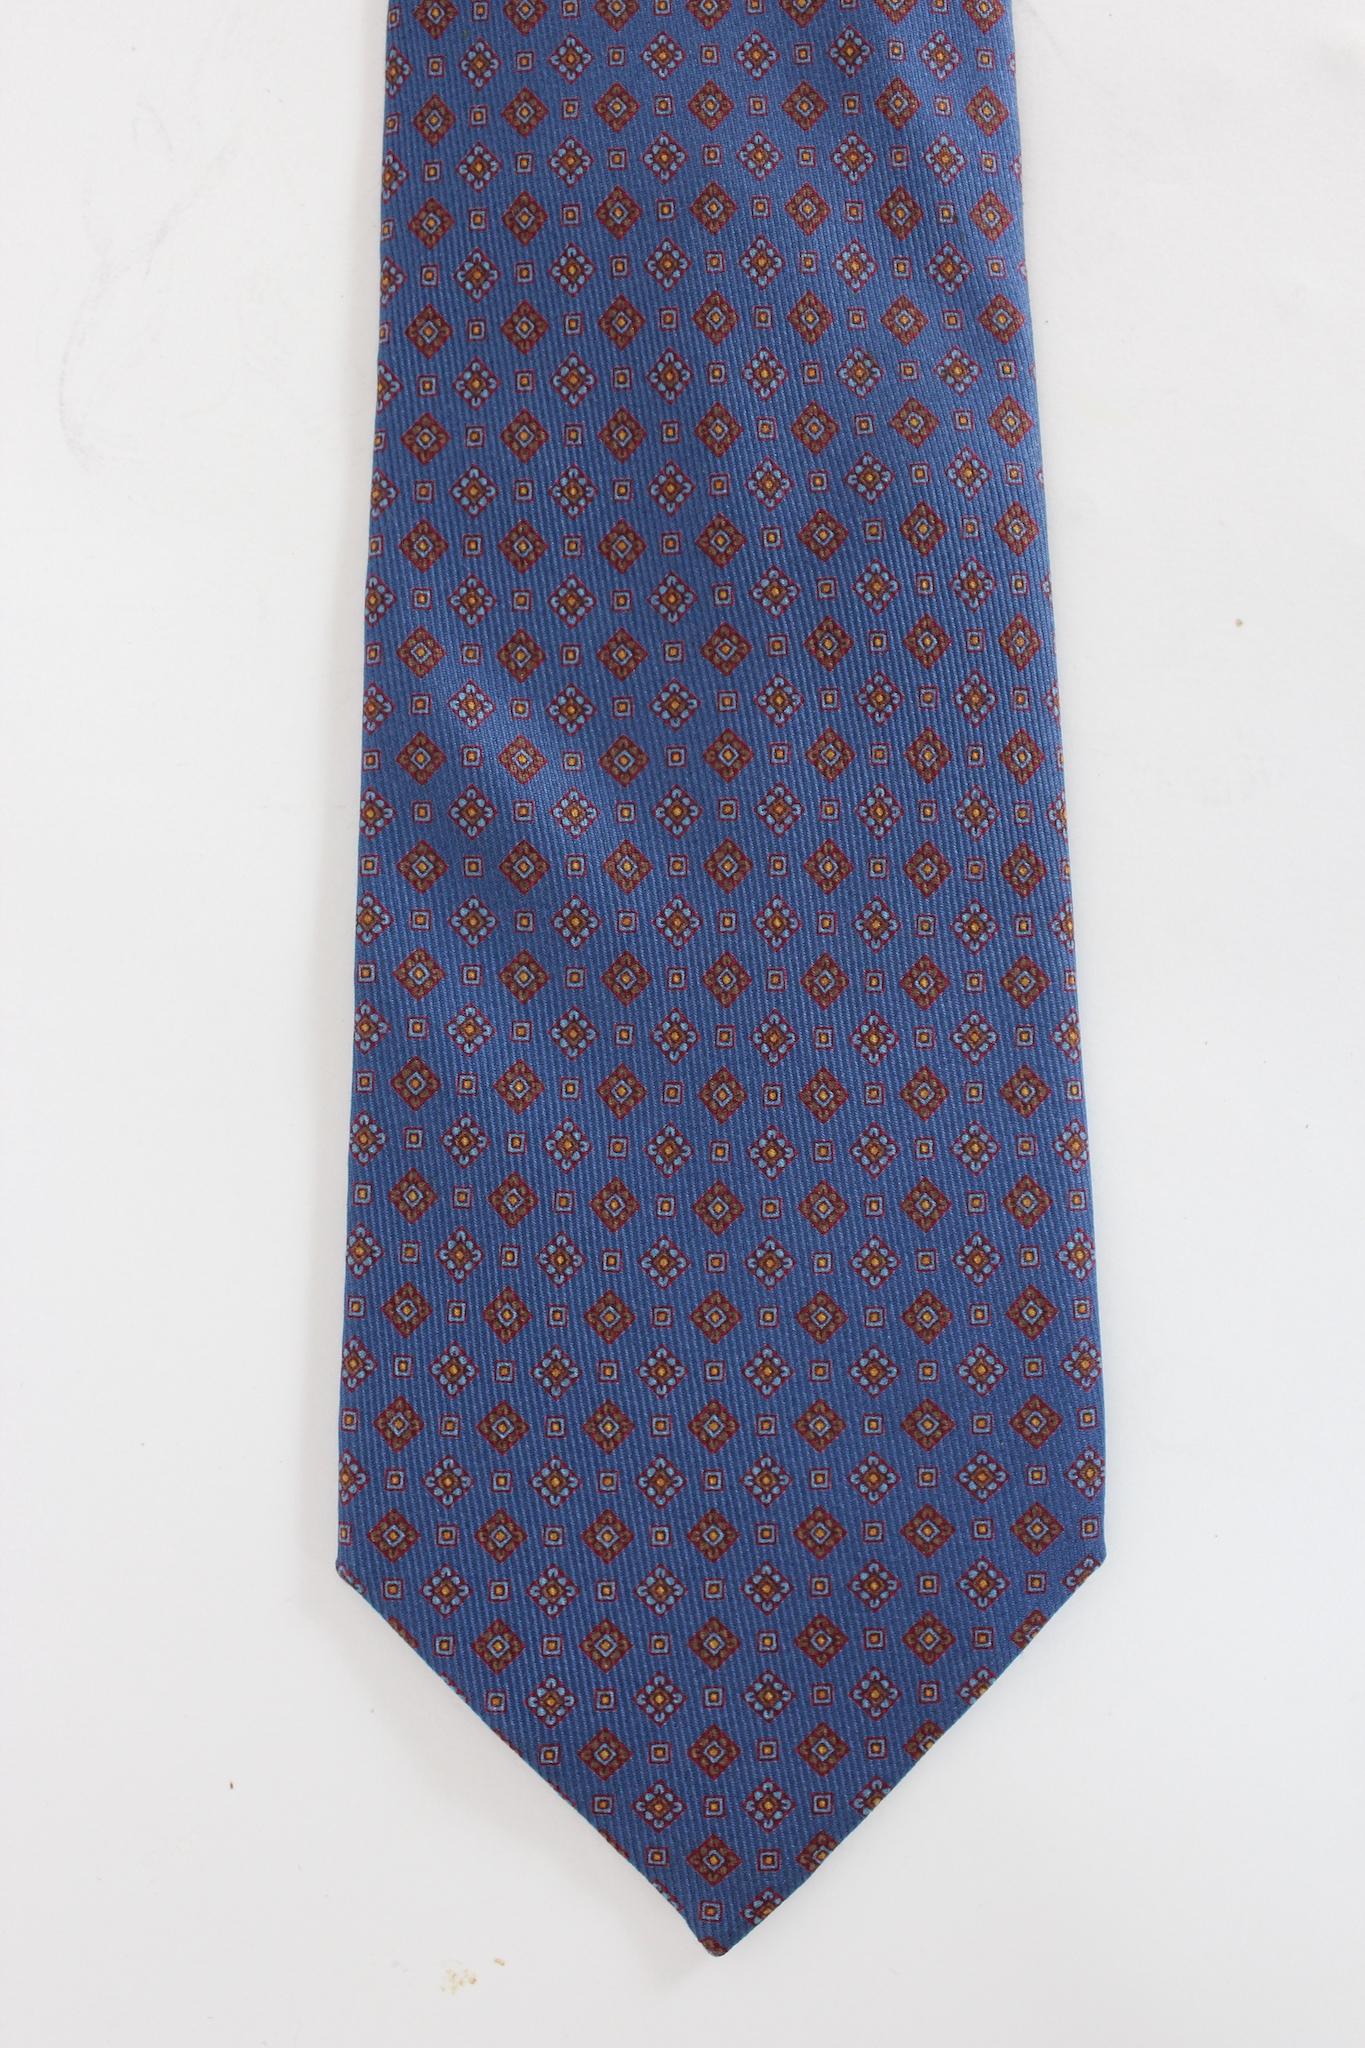 Etro vintage 90s tie. Blue and red color with geometric designs, in silk. Made in Italy.

Length: 145 cm
Width: 10 cm
